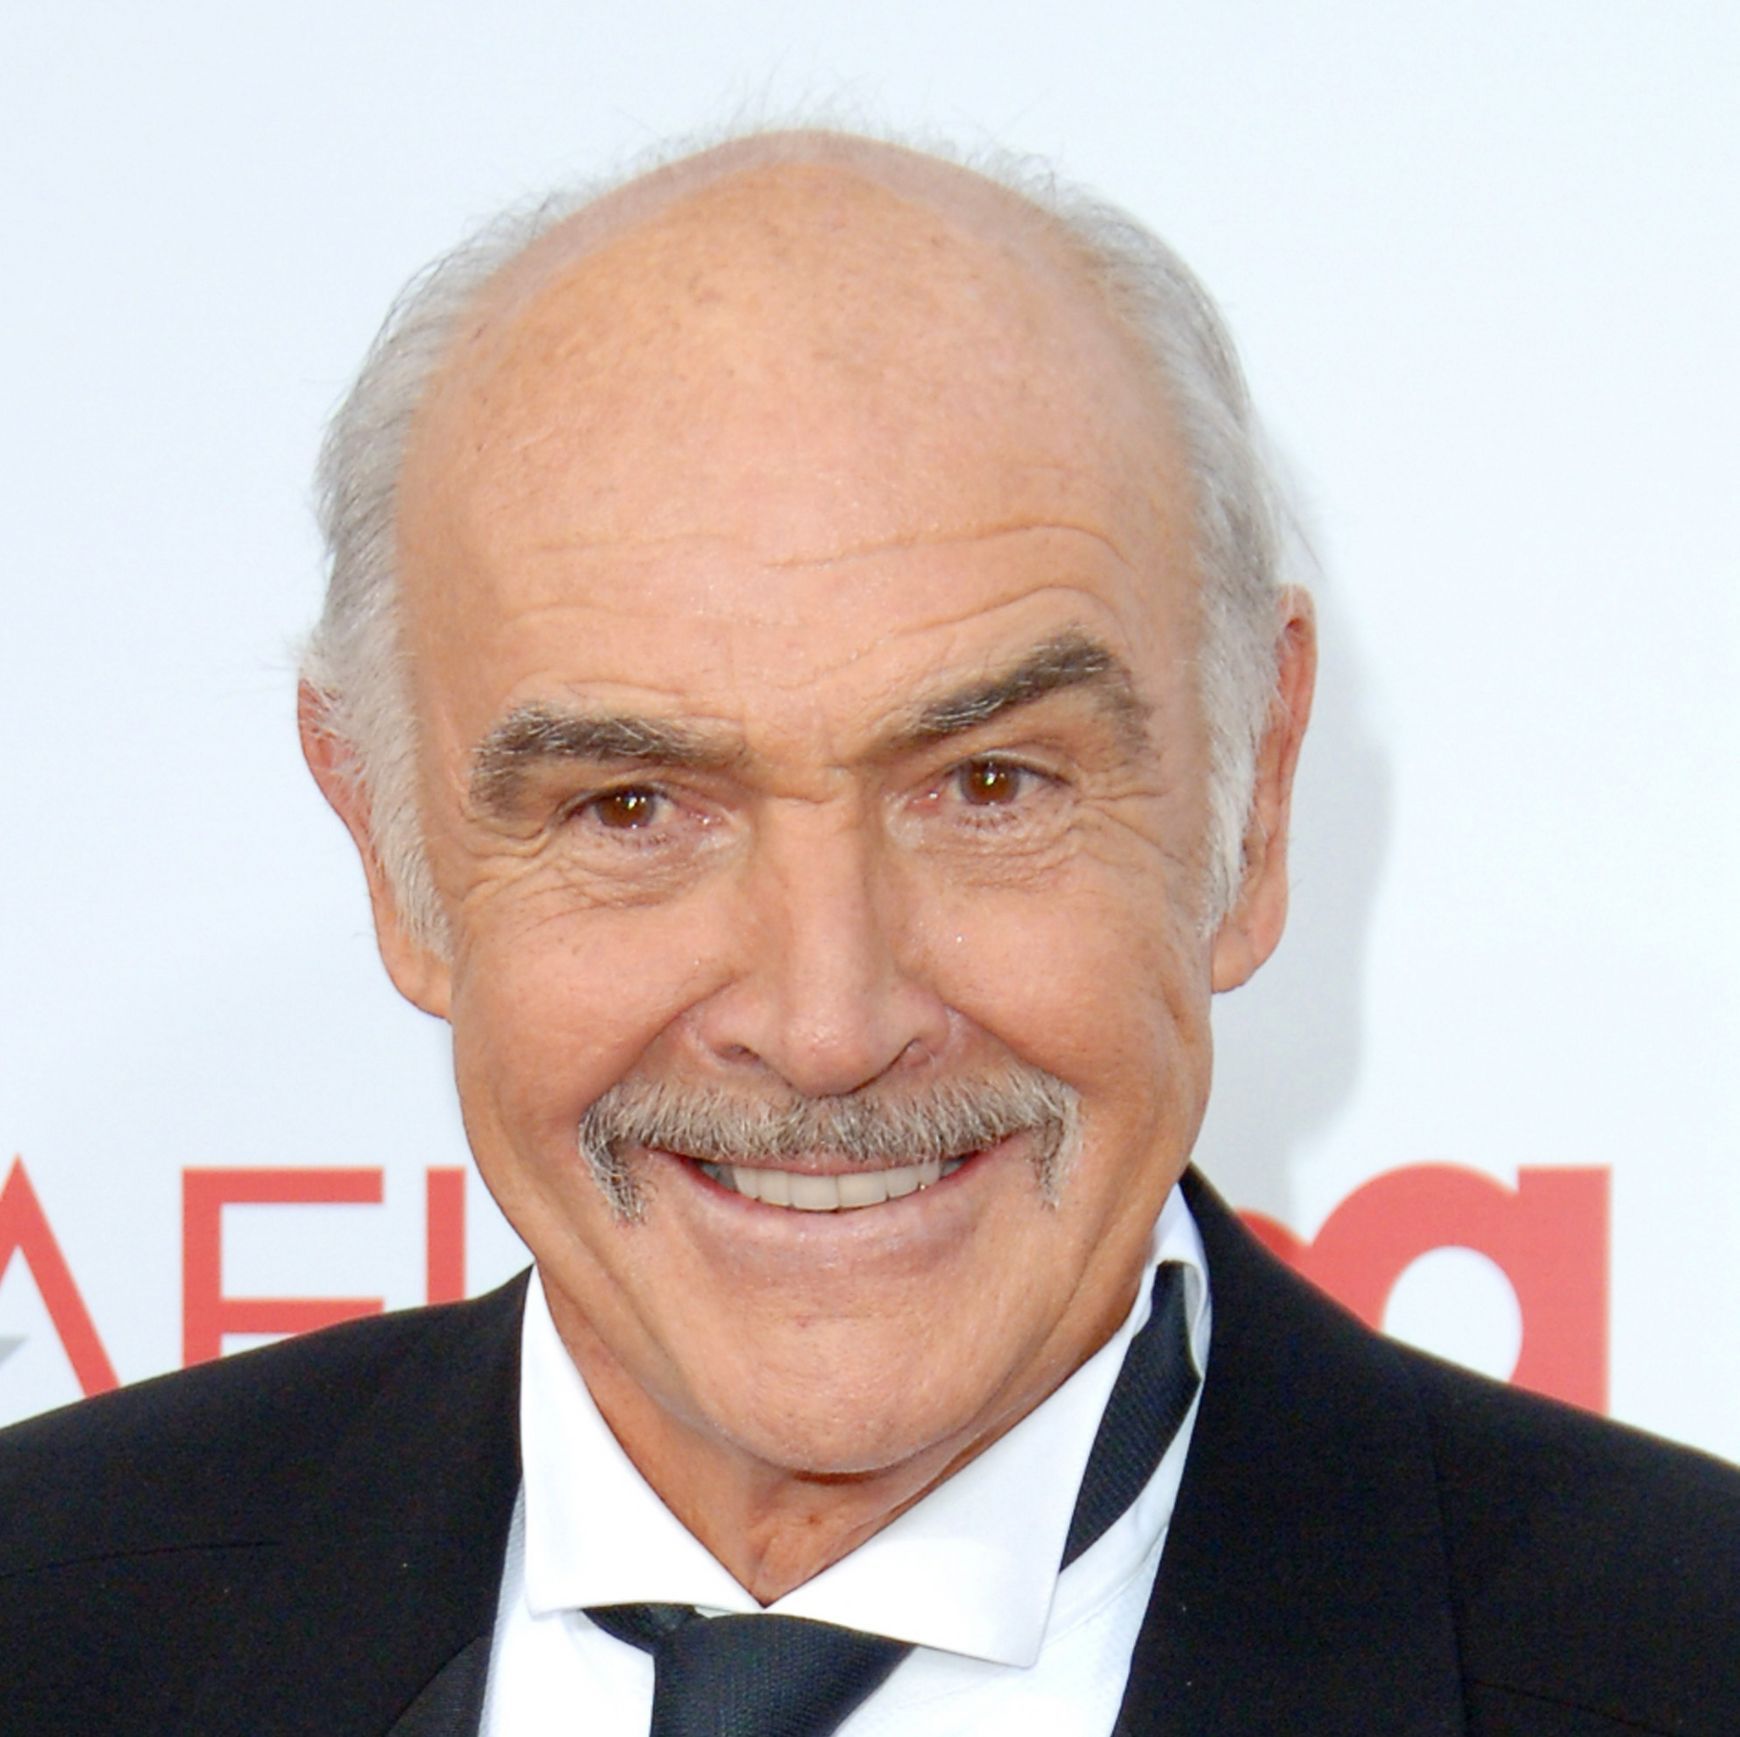 Scottish Officials Call Out Donald Trump For Lying About Sean Connery